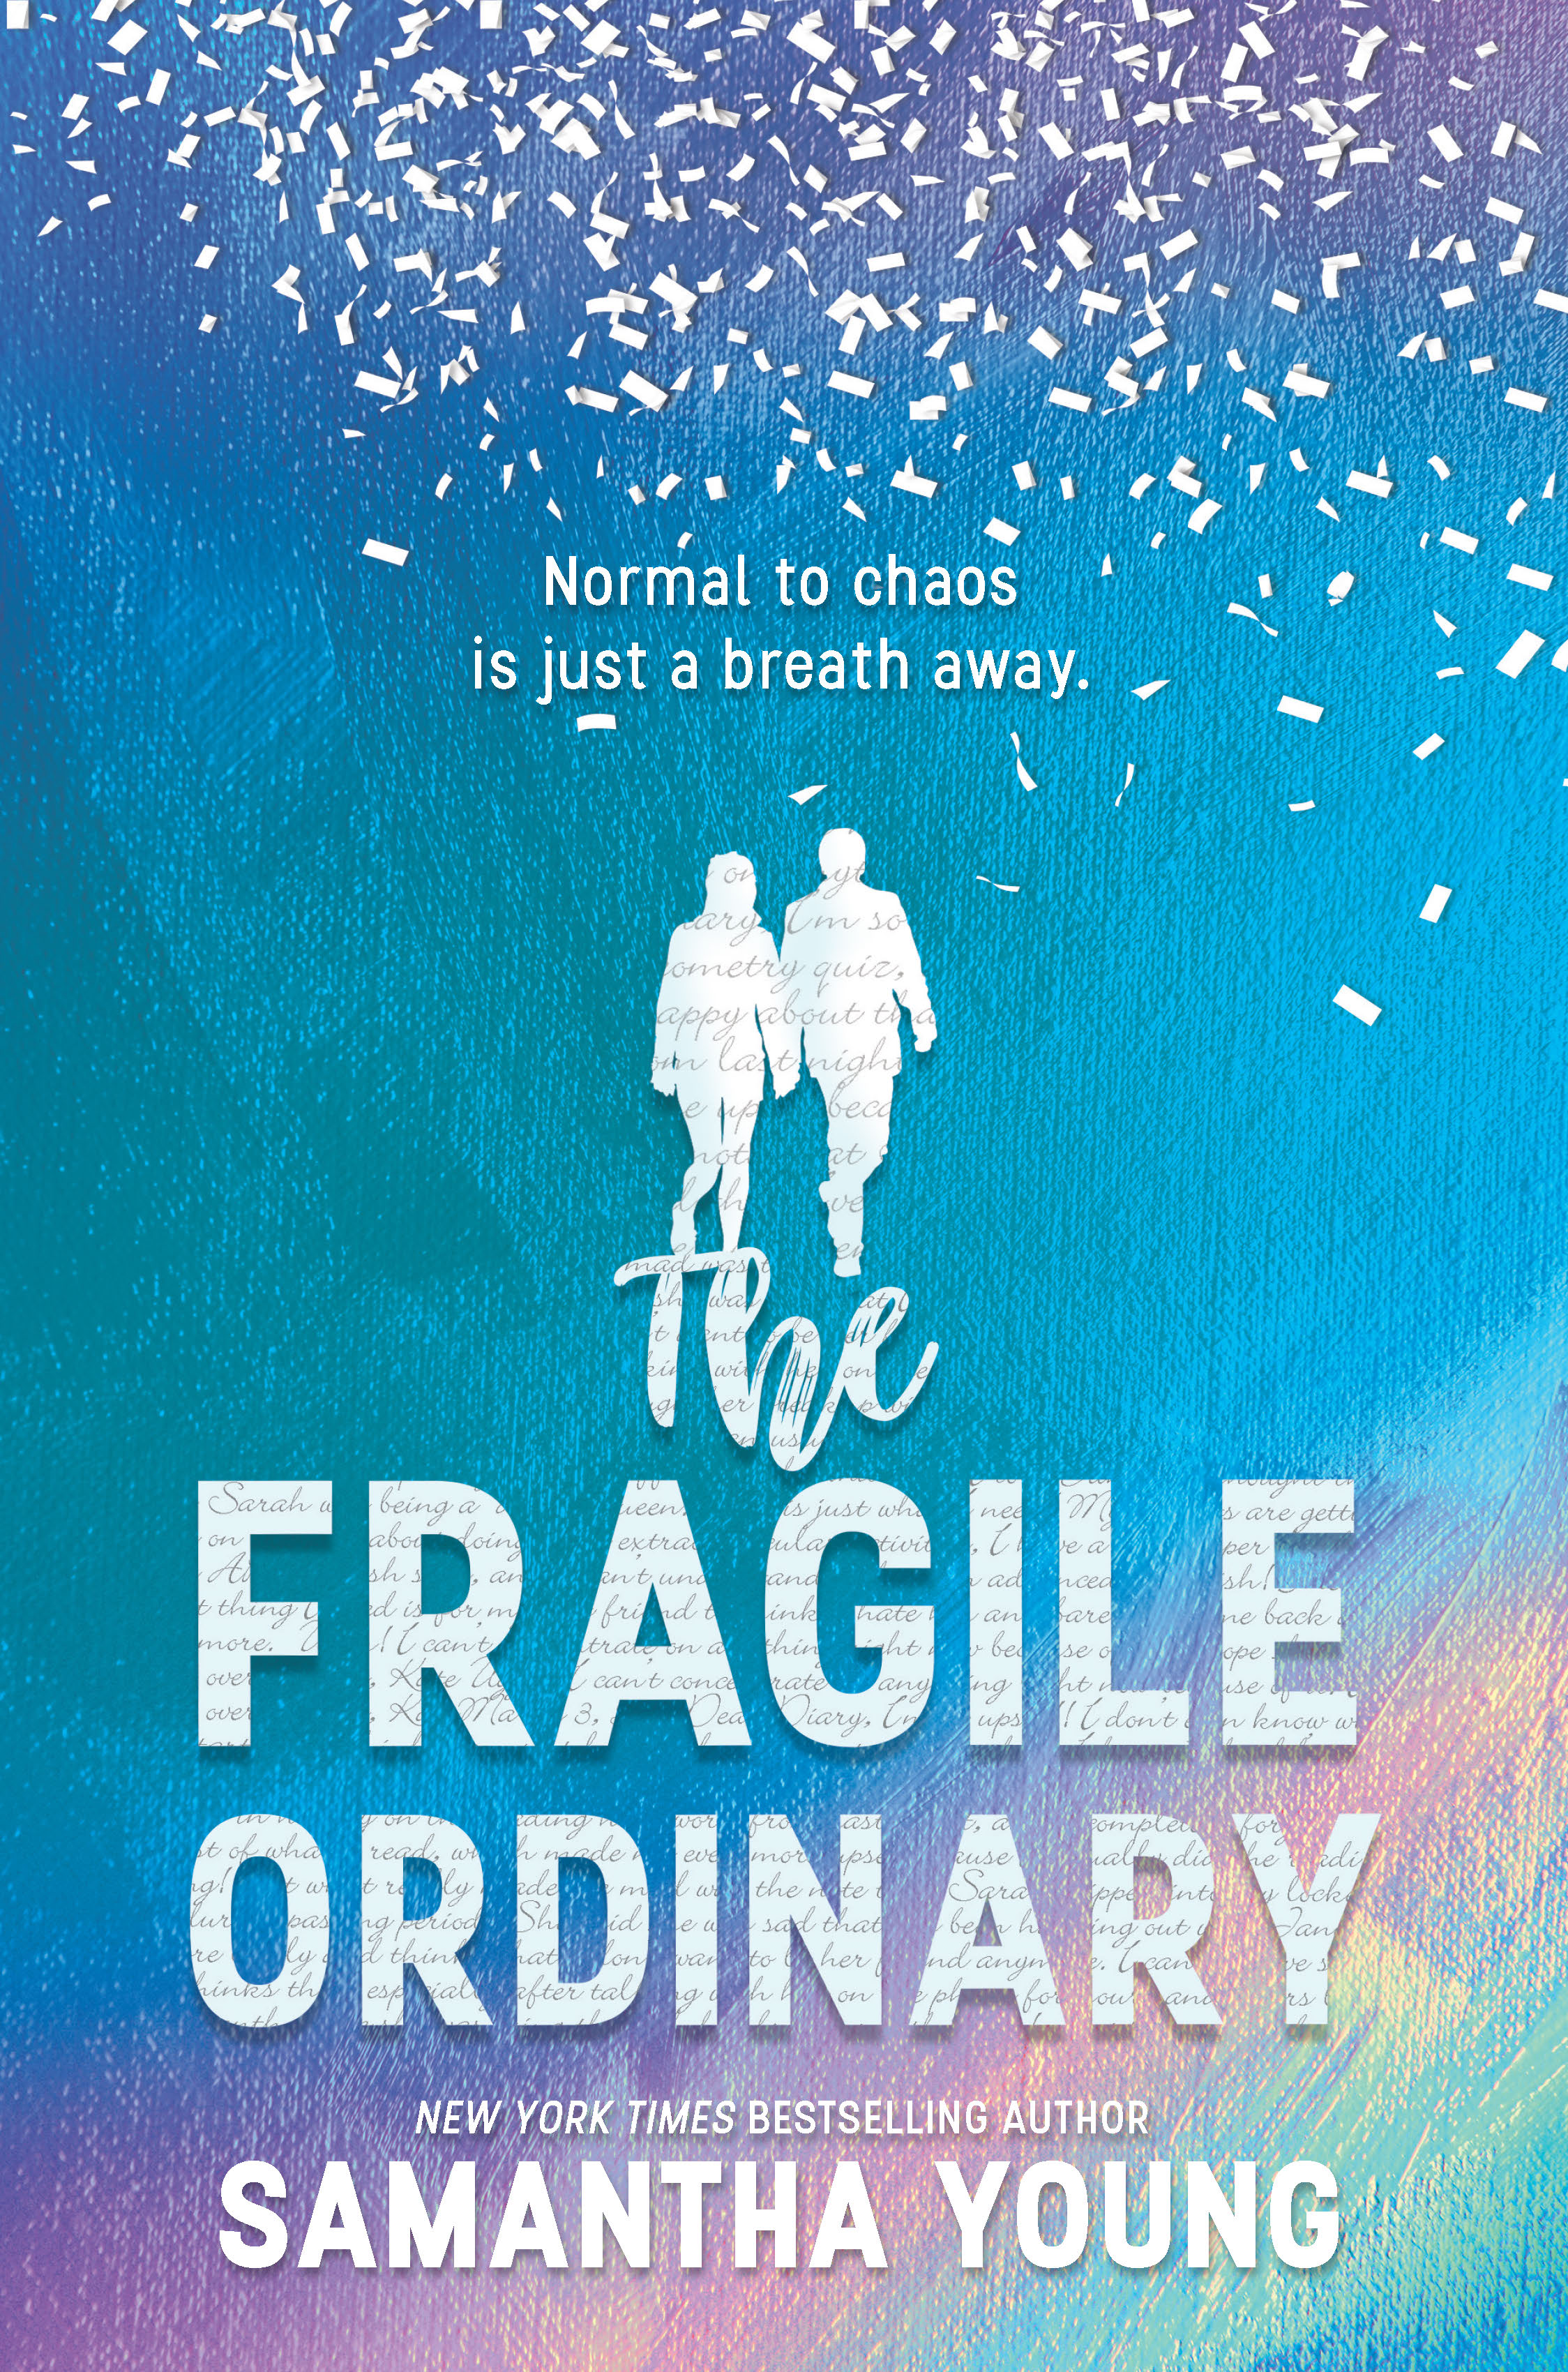 The Fragile Ordinary by Samantha Young [Blog Tour]